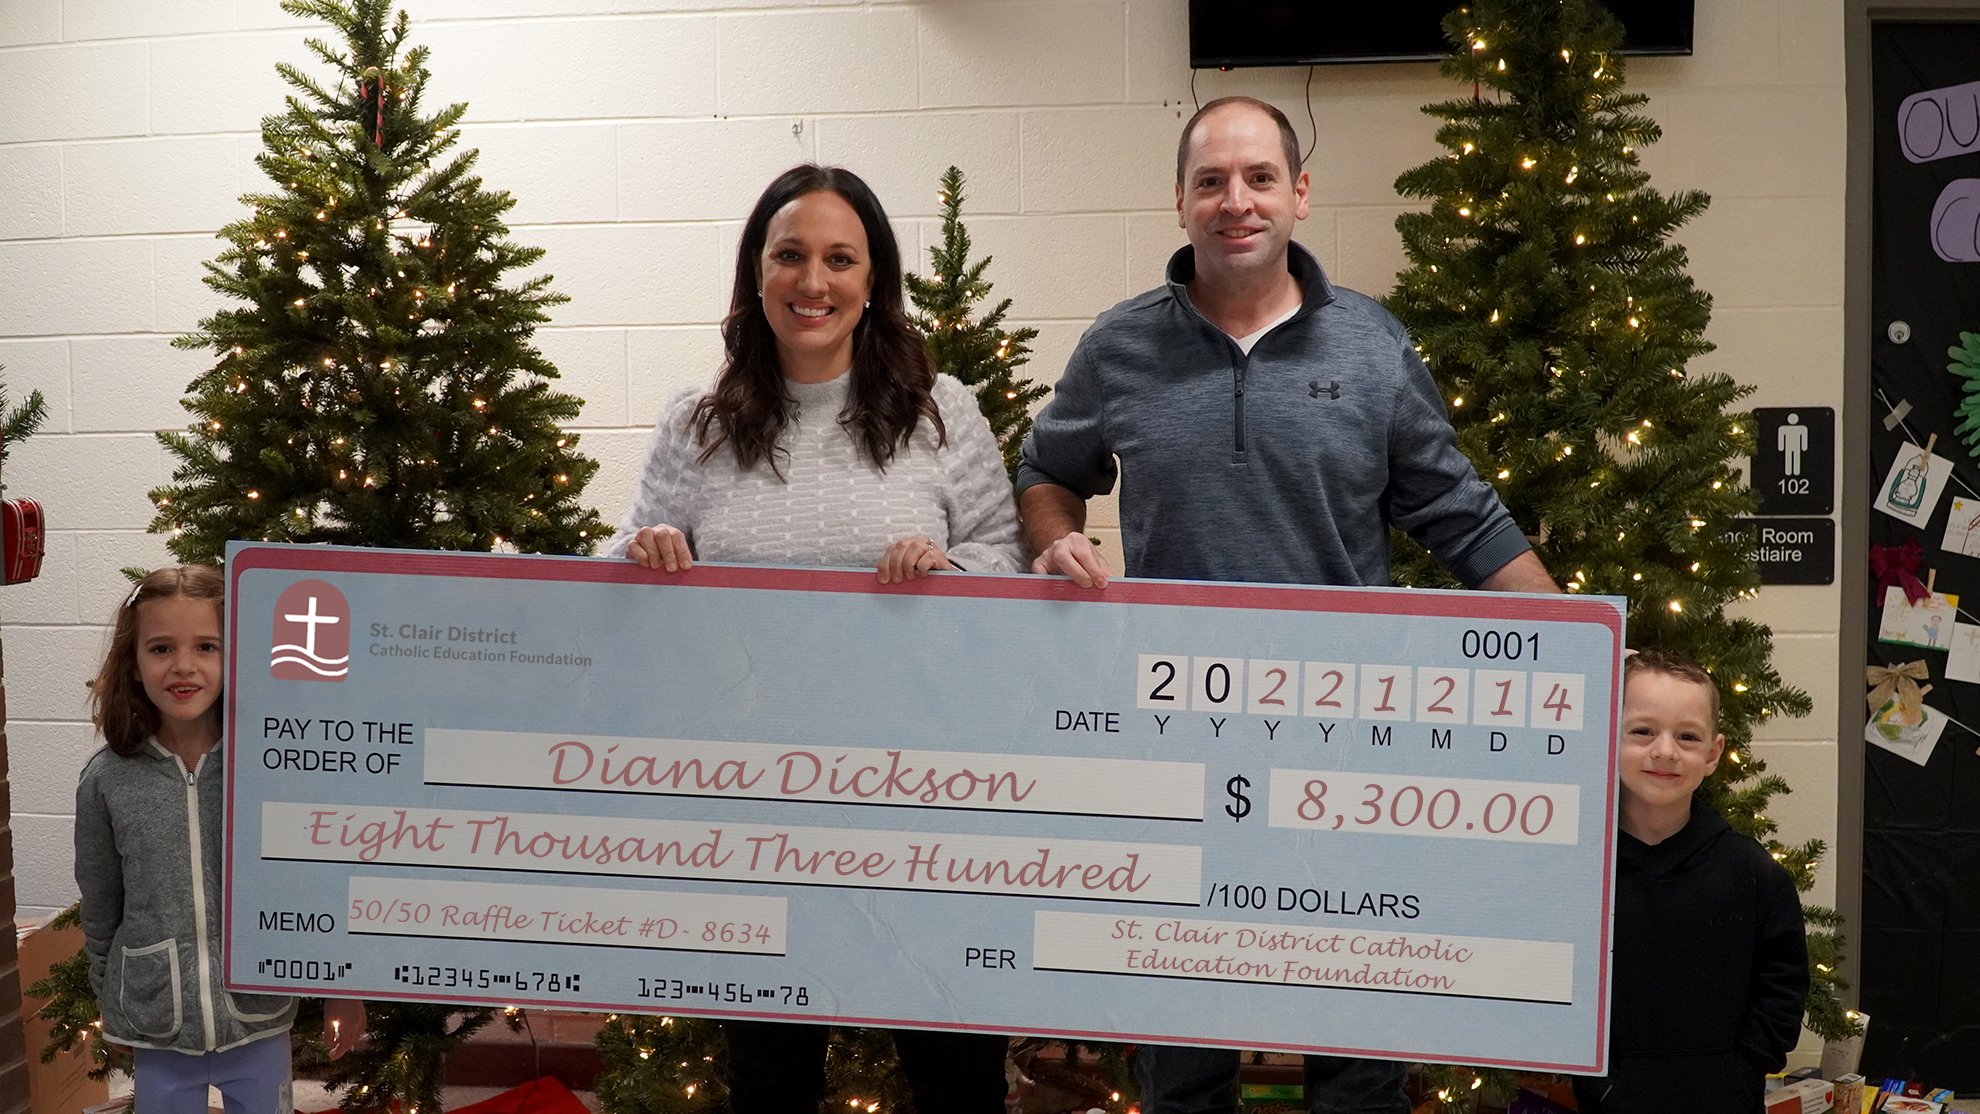 Dickson Family from Sarnia Wins $8,300 in St. Clair Foundation’s 50/50 Christmas Raffle